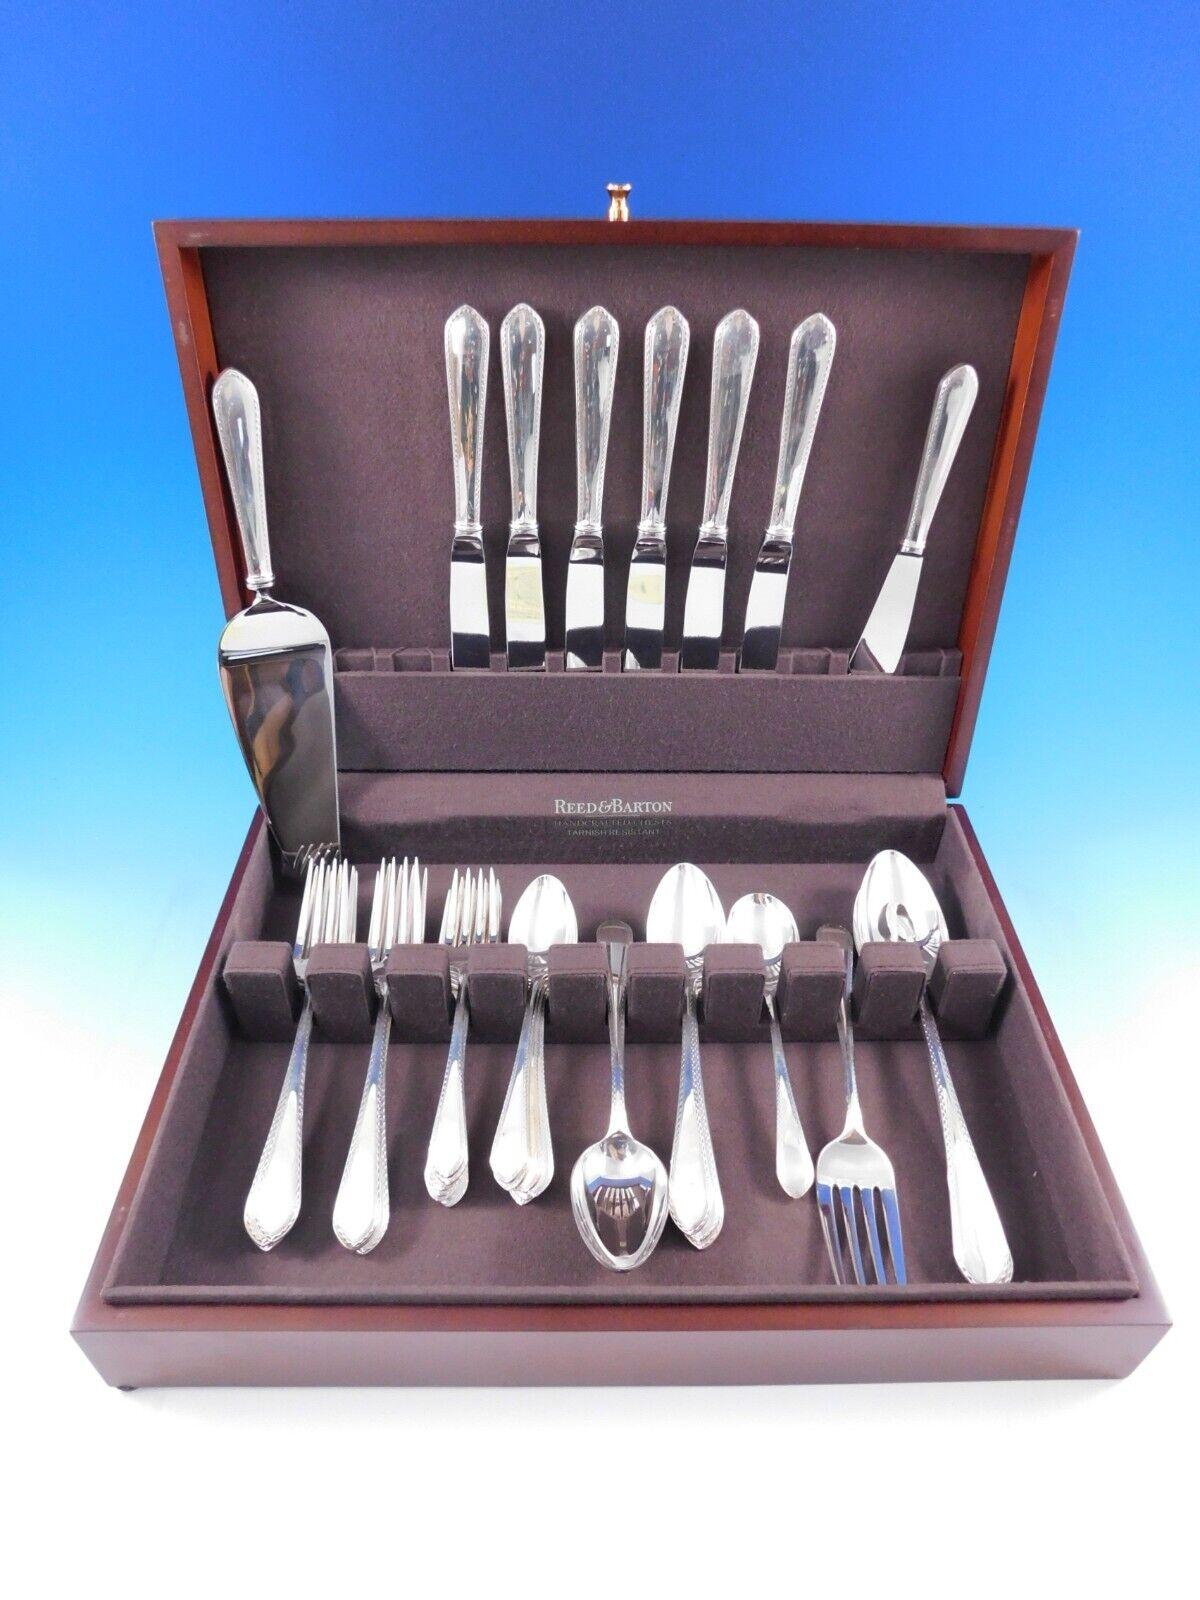  Scarso set di posate in argento Sterling Early Colonial by Lunt Silver - 36 pezzi. Questo set comprende:

6 coltelli, 9 1/8